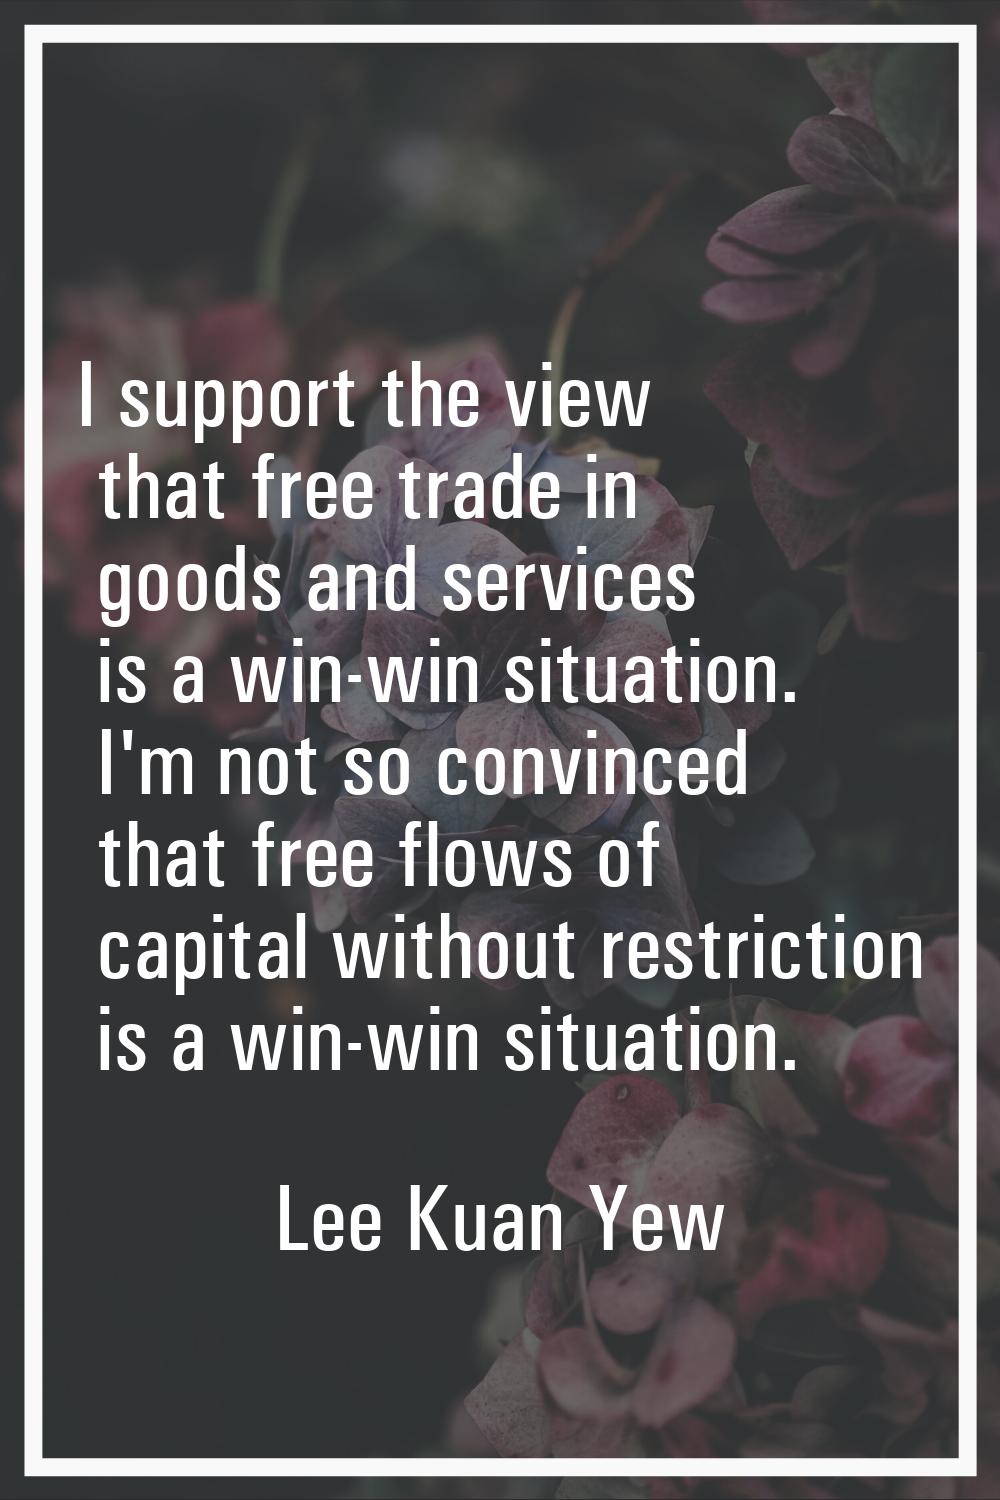 I support the view that free trade in goods and services is a win-win situation. I'm not so convinc